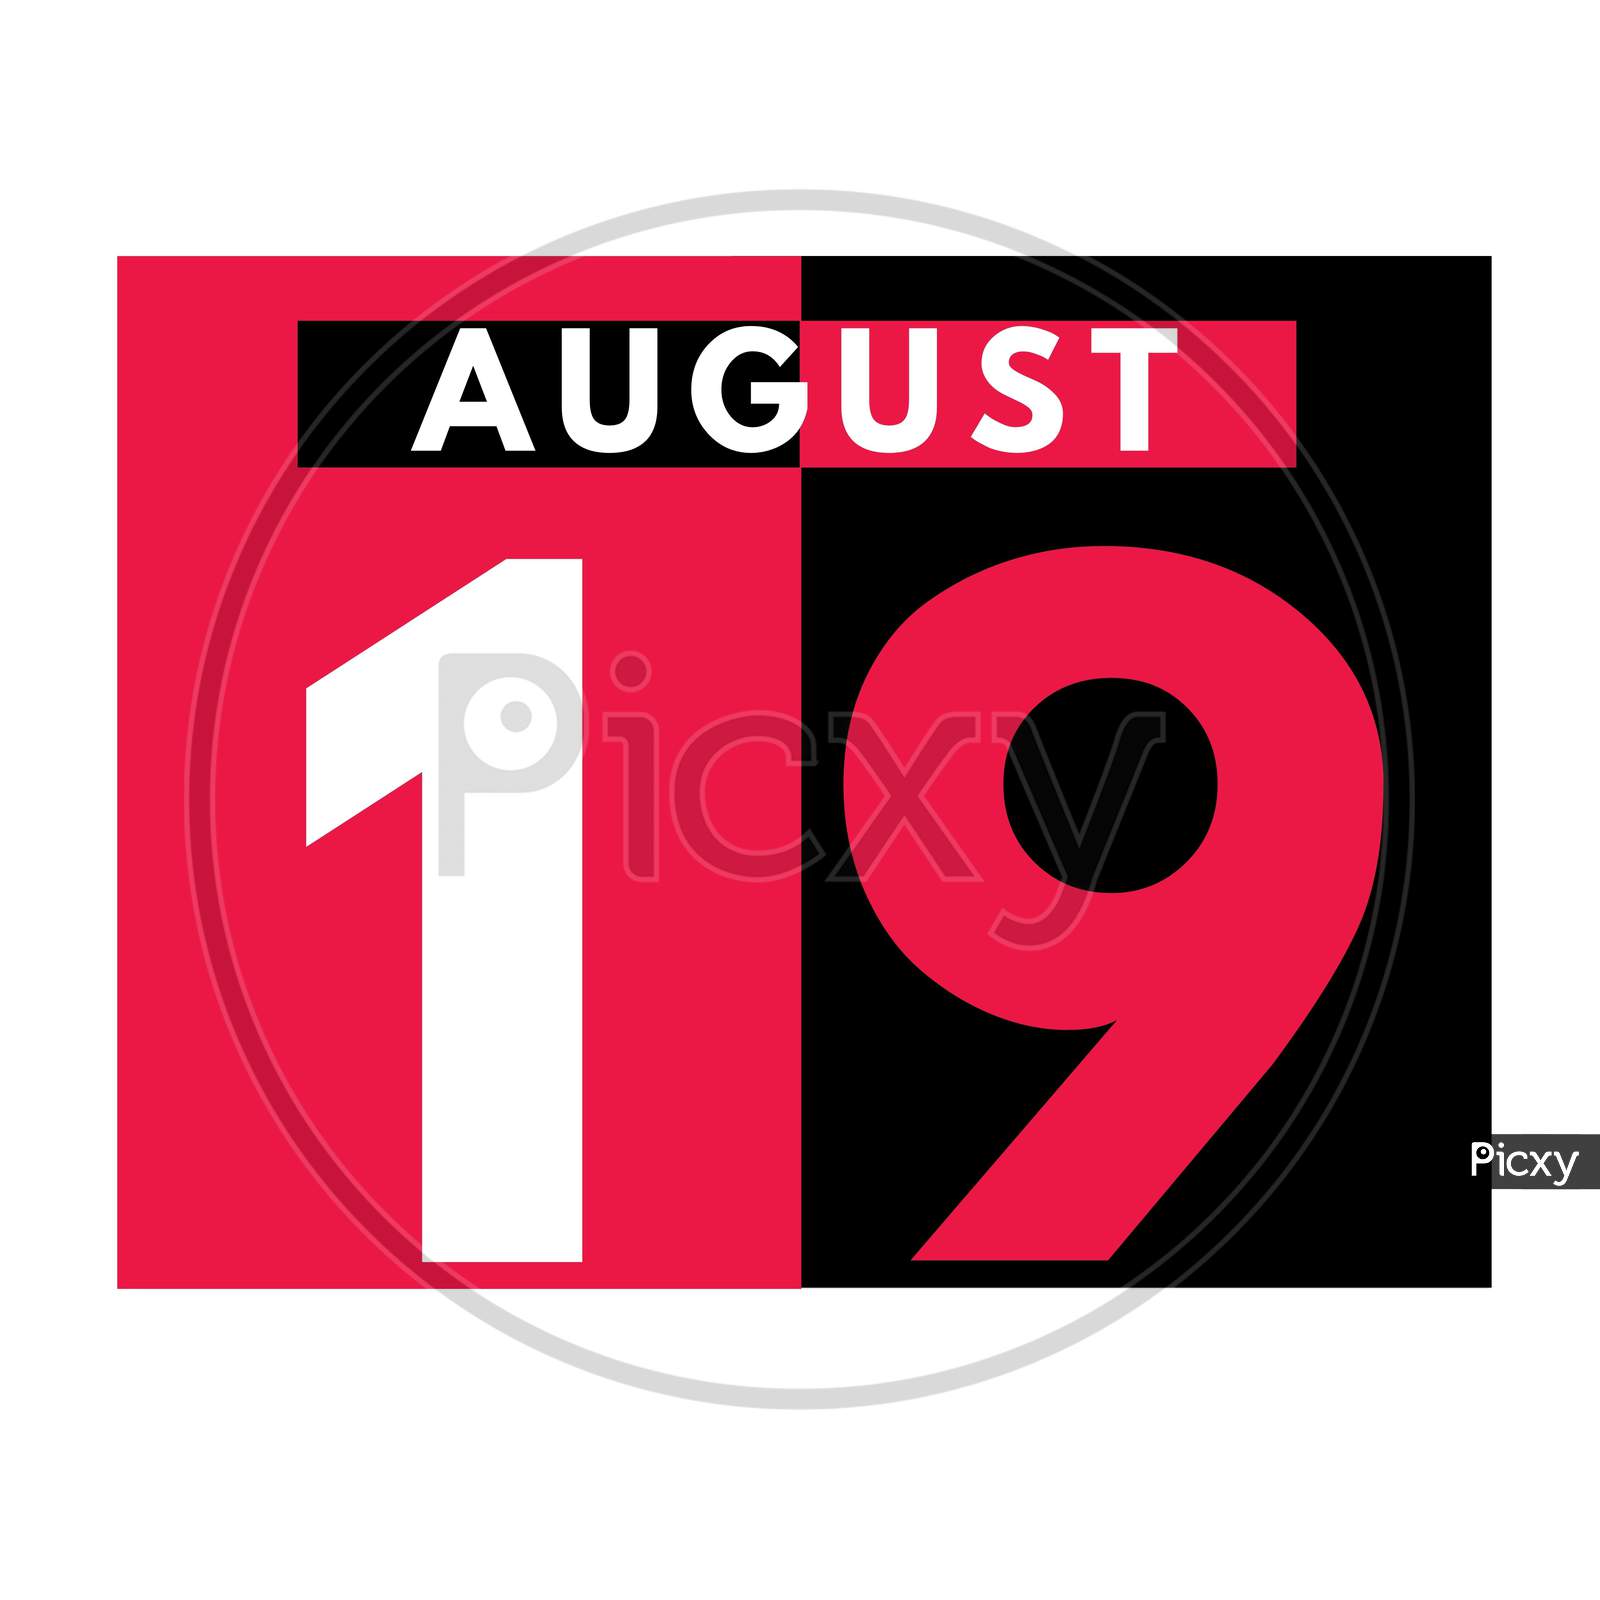 August 19 . Modern Daily Calendar Icon .Date ,Day, Month .Calendar For The Month Of August